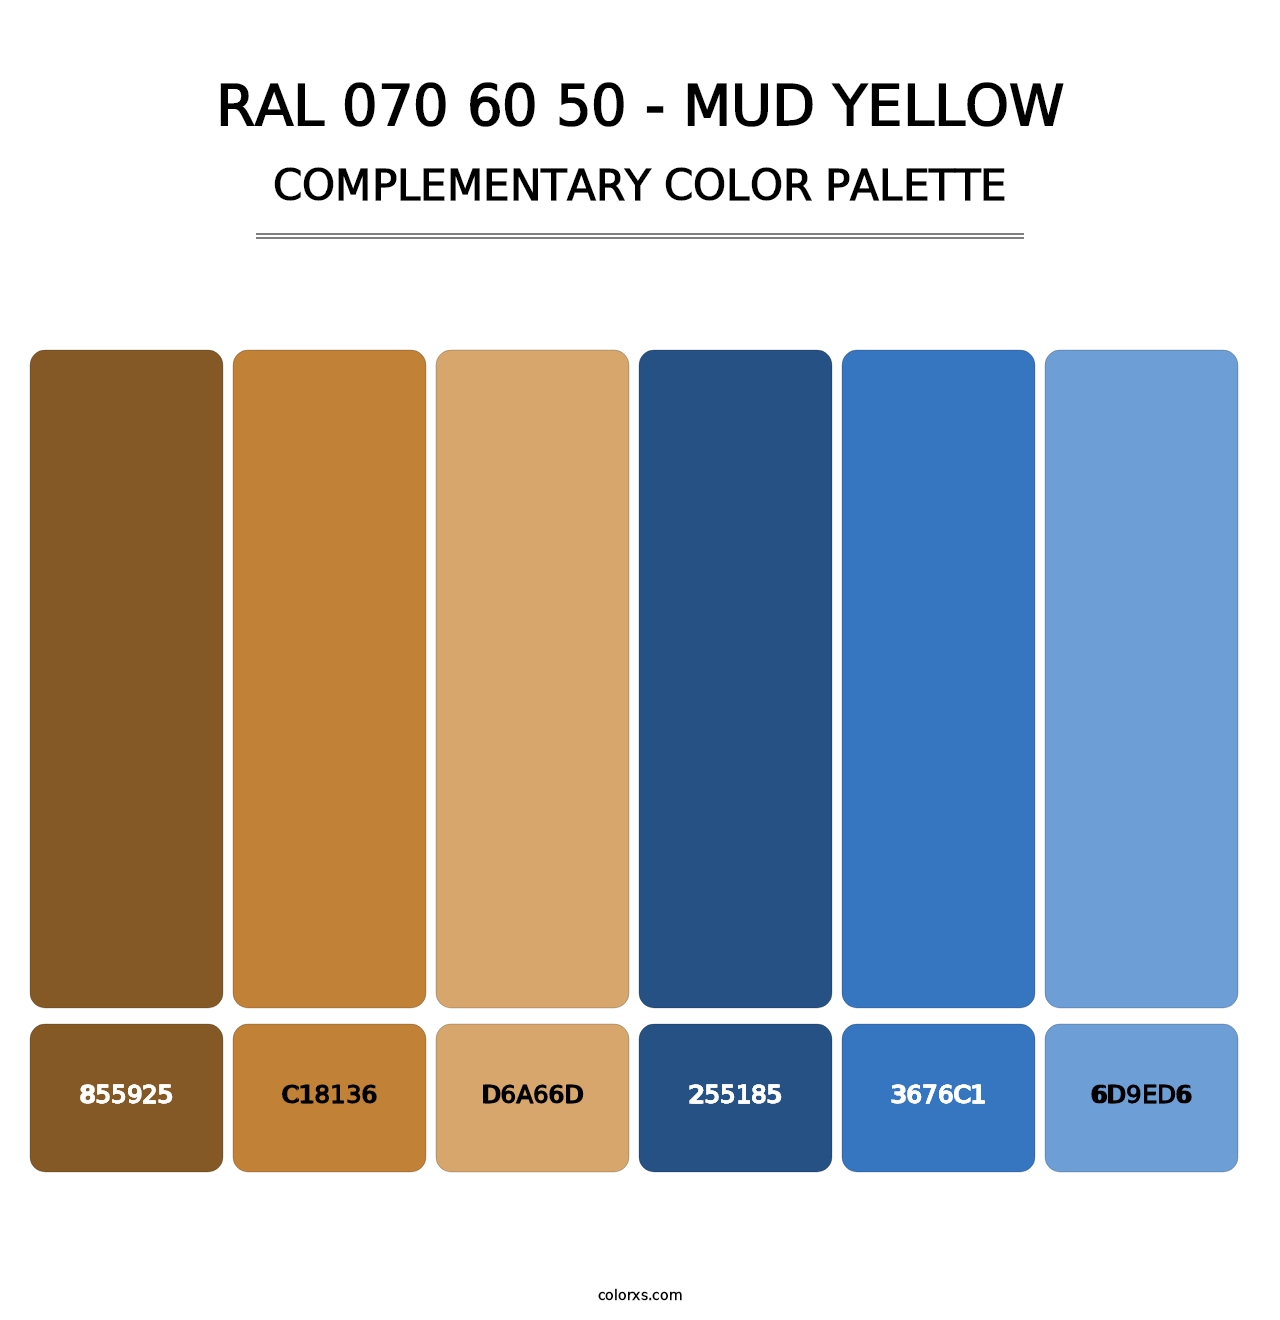 RAL 070 60 50 - Mud Yellow - Complementary Color Palette